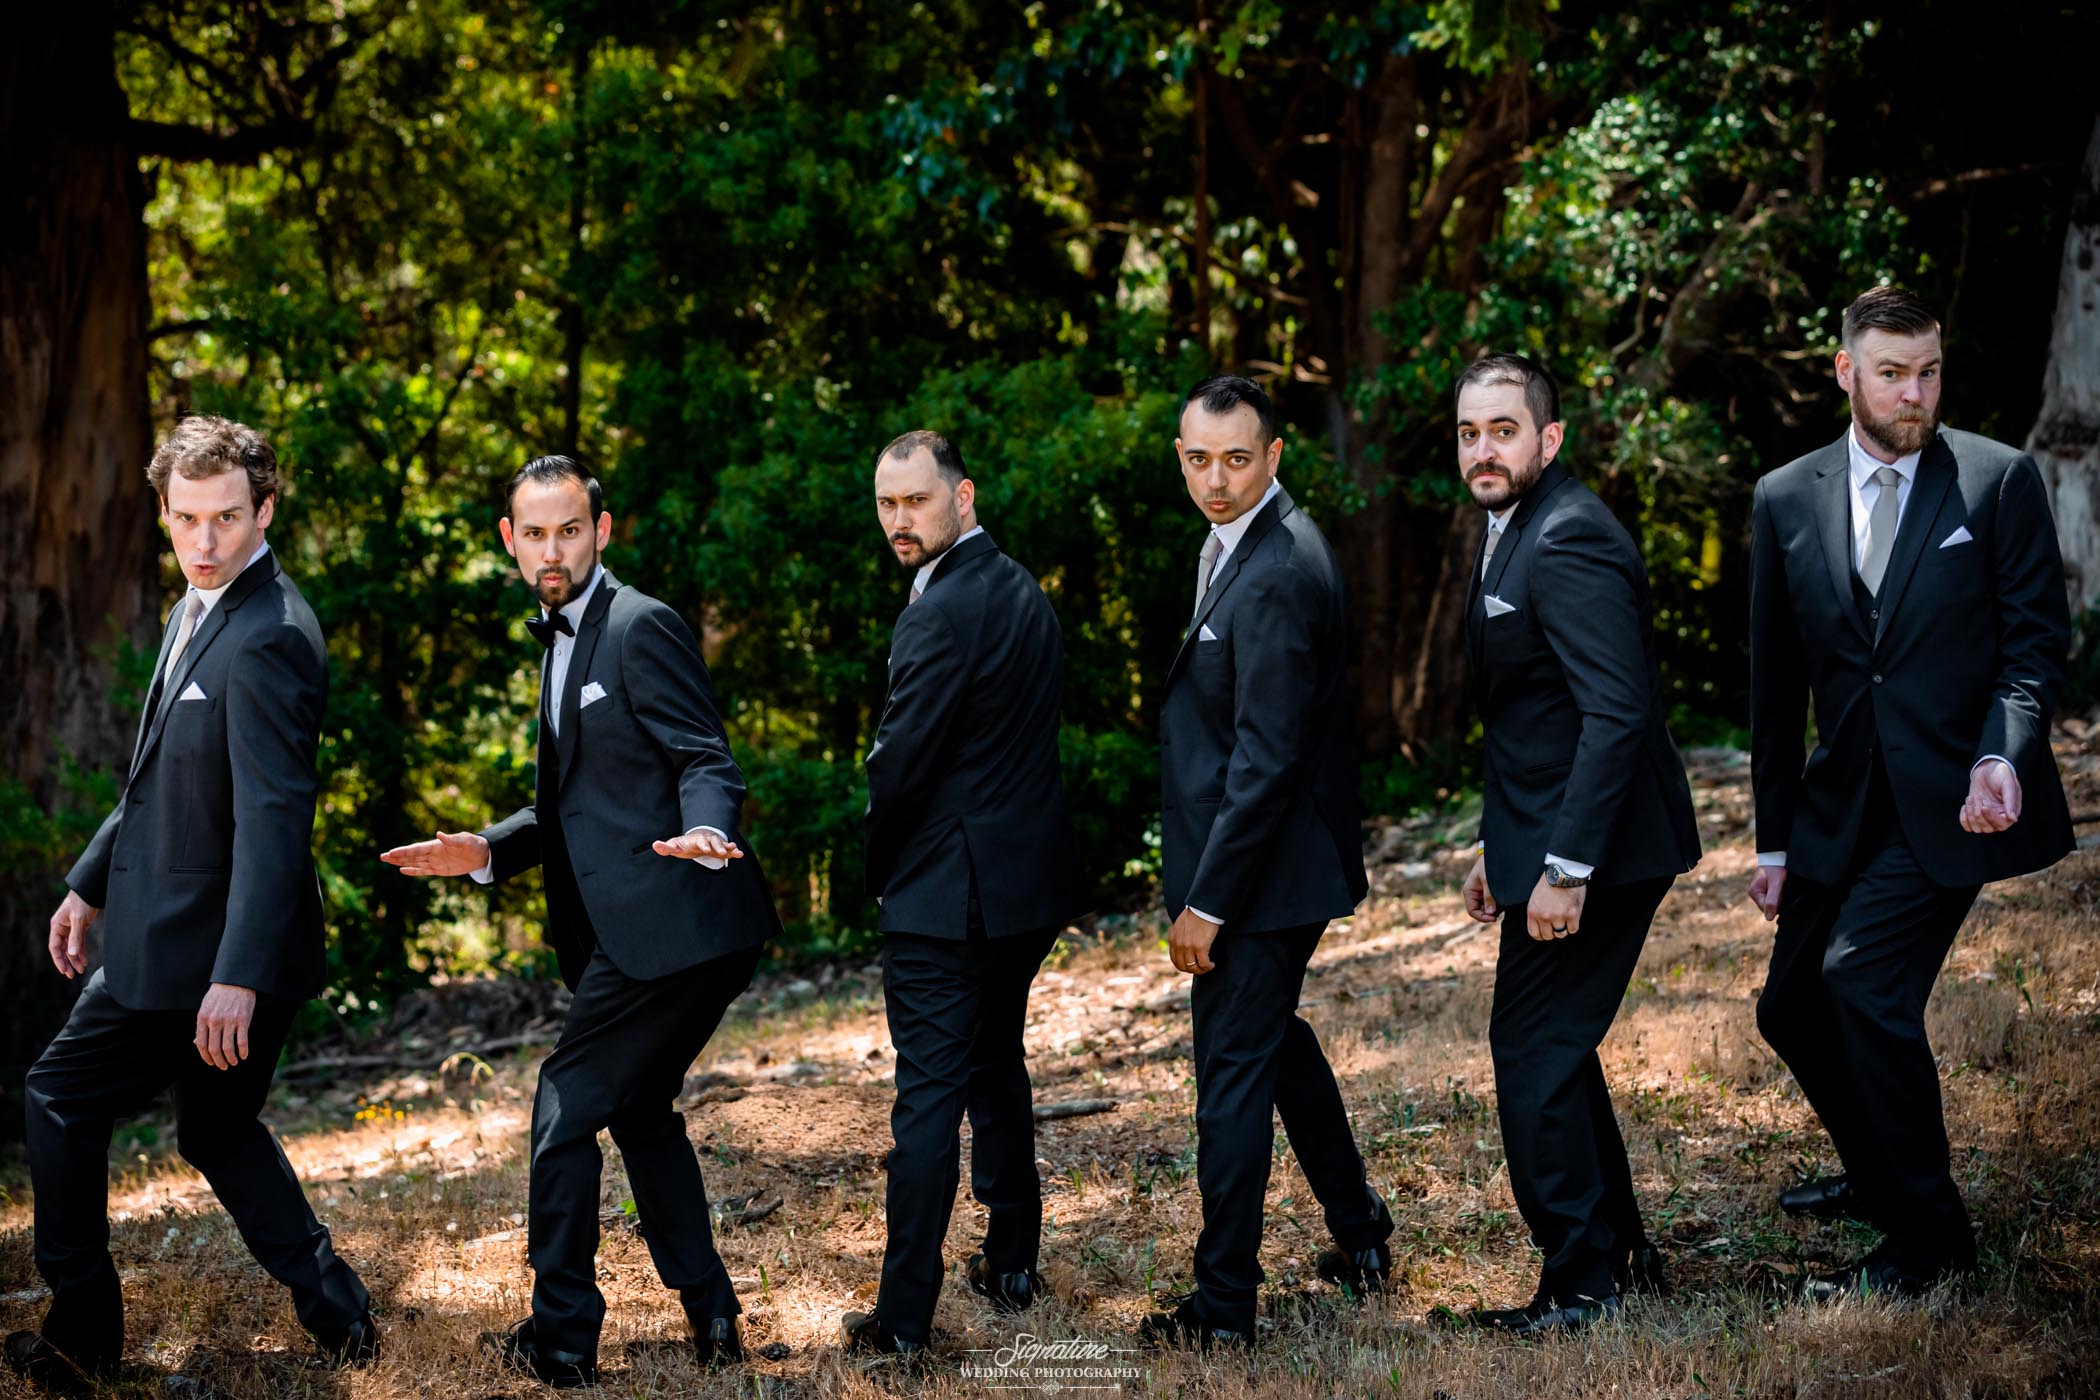 Groom and groomsmen fun pose in forest